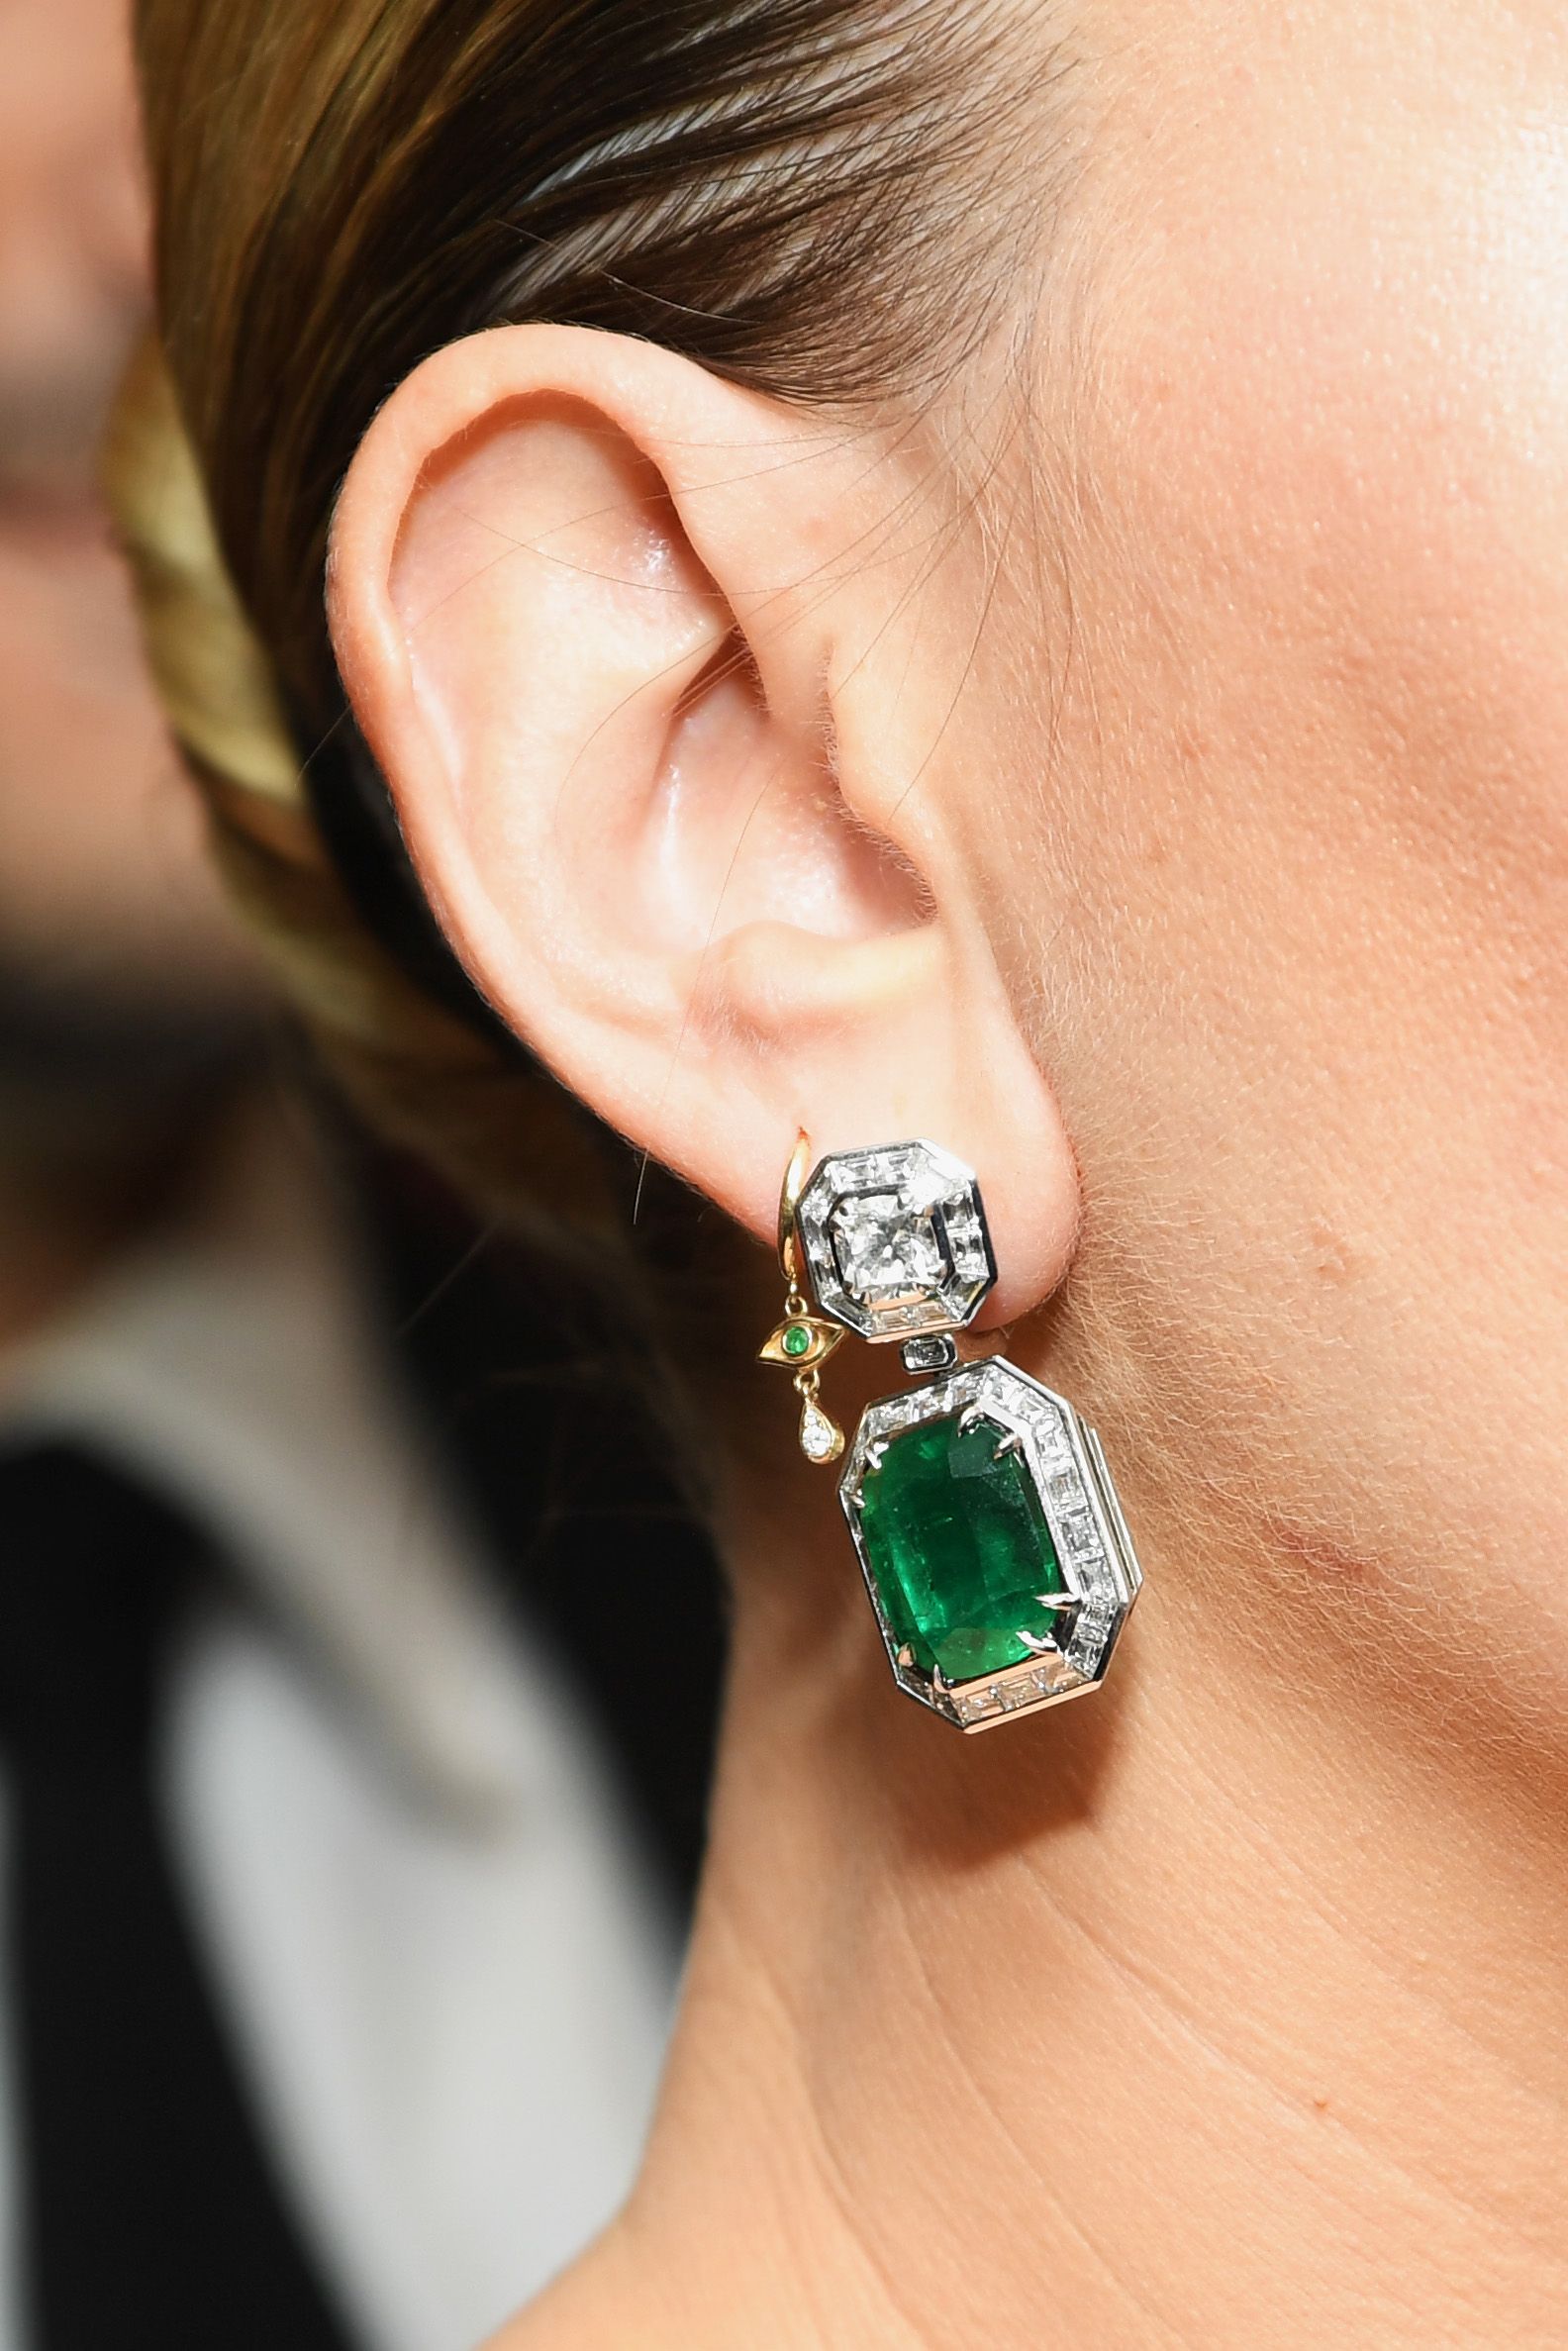 Scarlett Johansson Accents Her Elegant Holiday Look with Gorgeous Emerald  Earrings at David Yurman Event